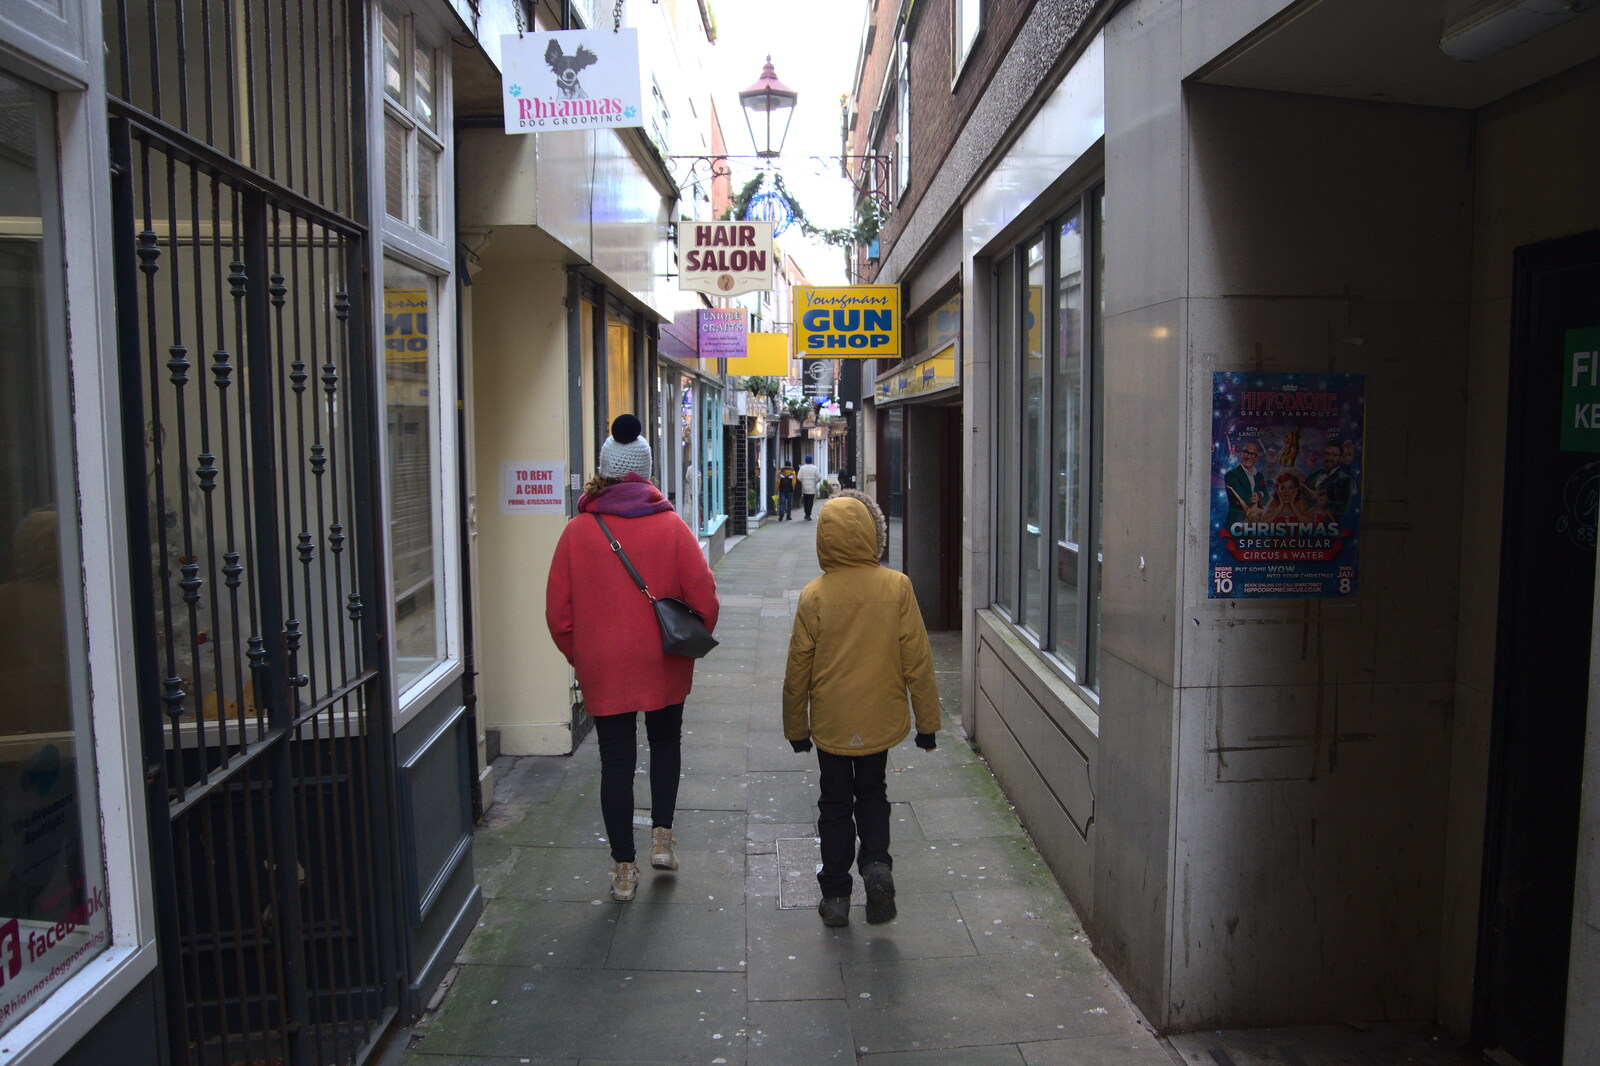 Isobel and Harry explore one of the famous Rows from The Hippodrome Christmas Spectacular, Great Yarmouth, Norfolk - 29th December 2022